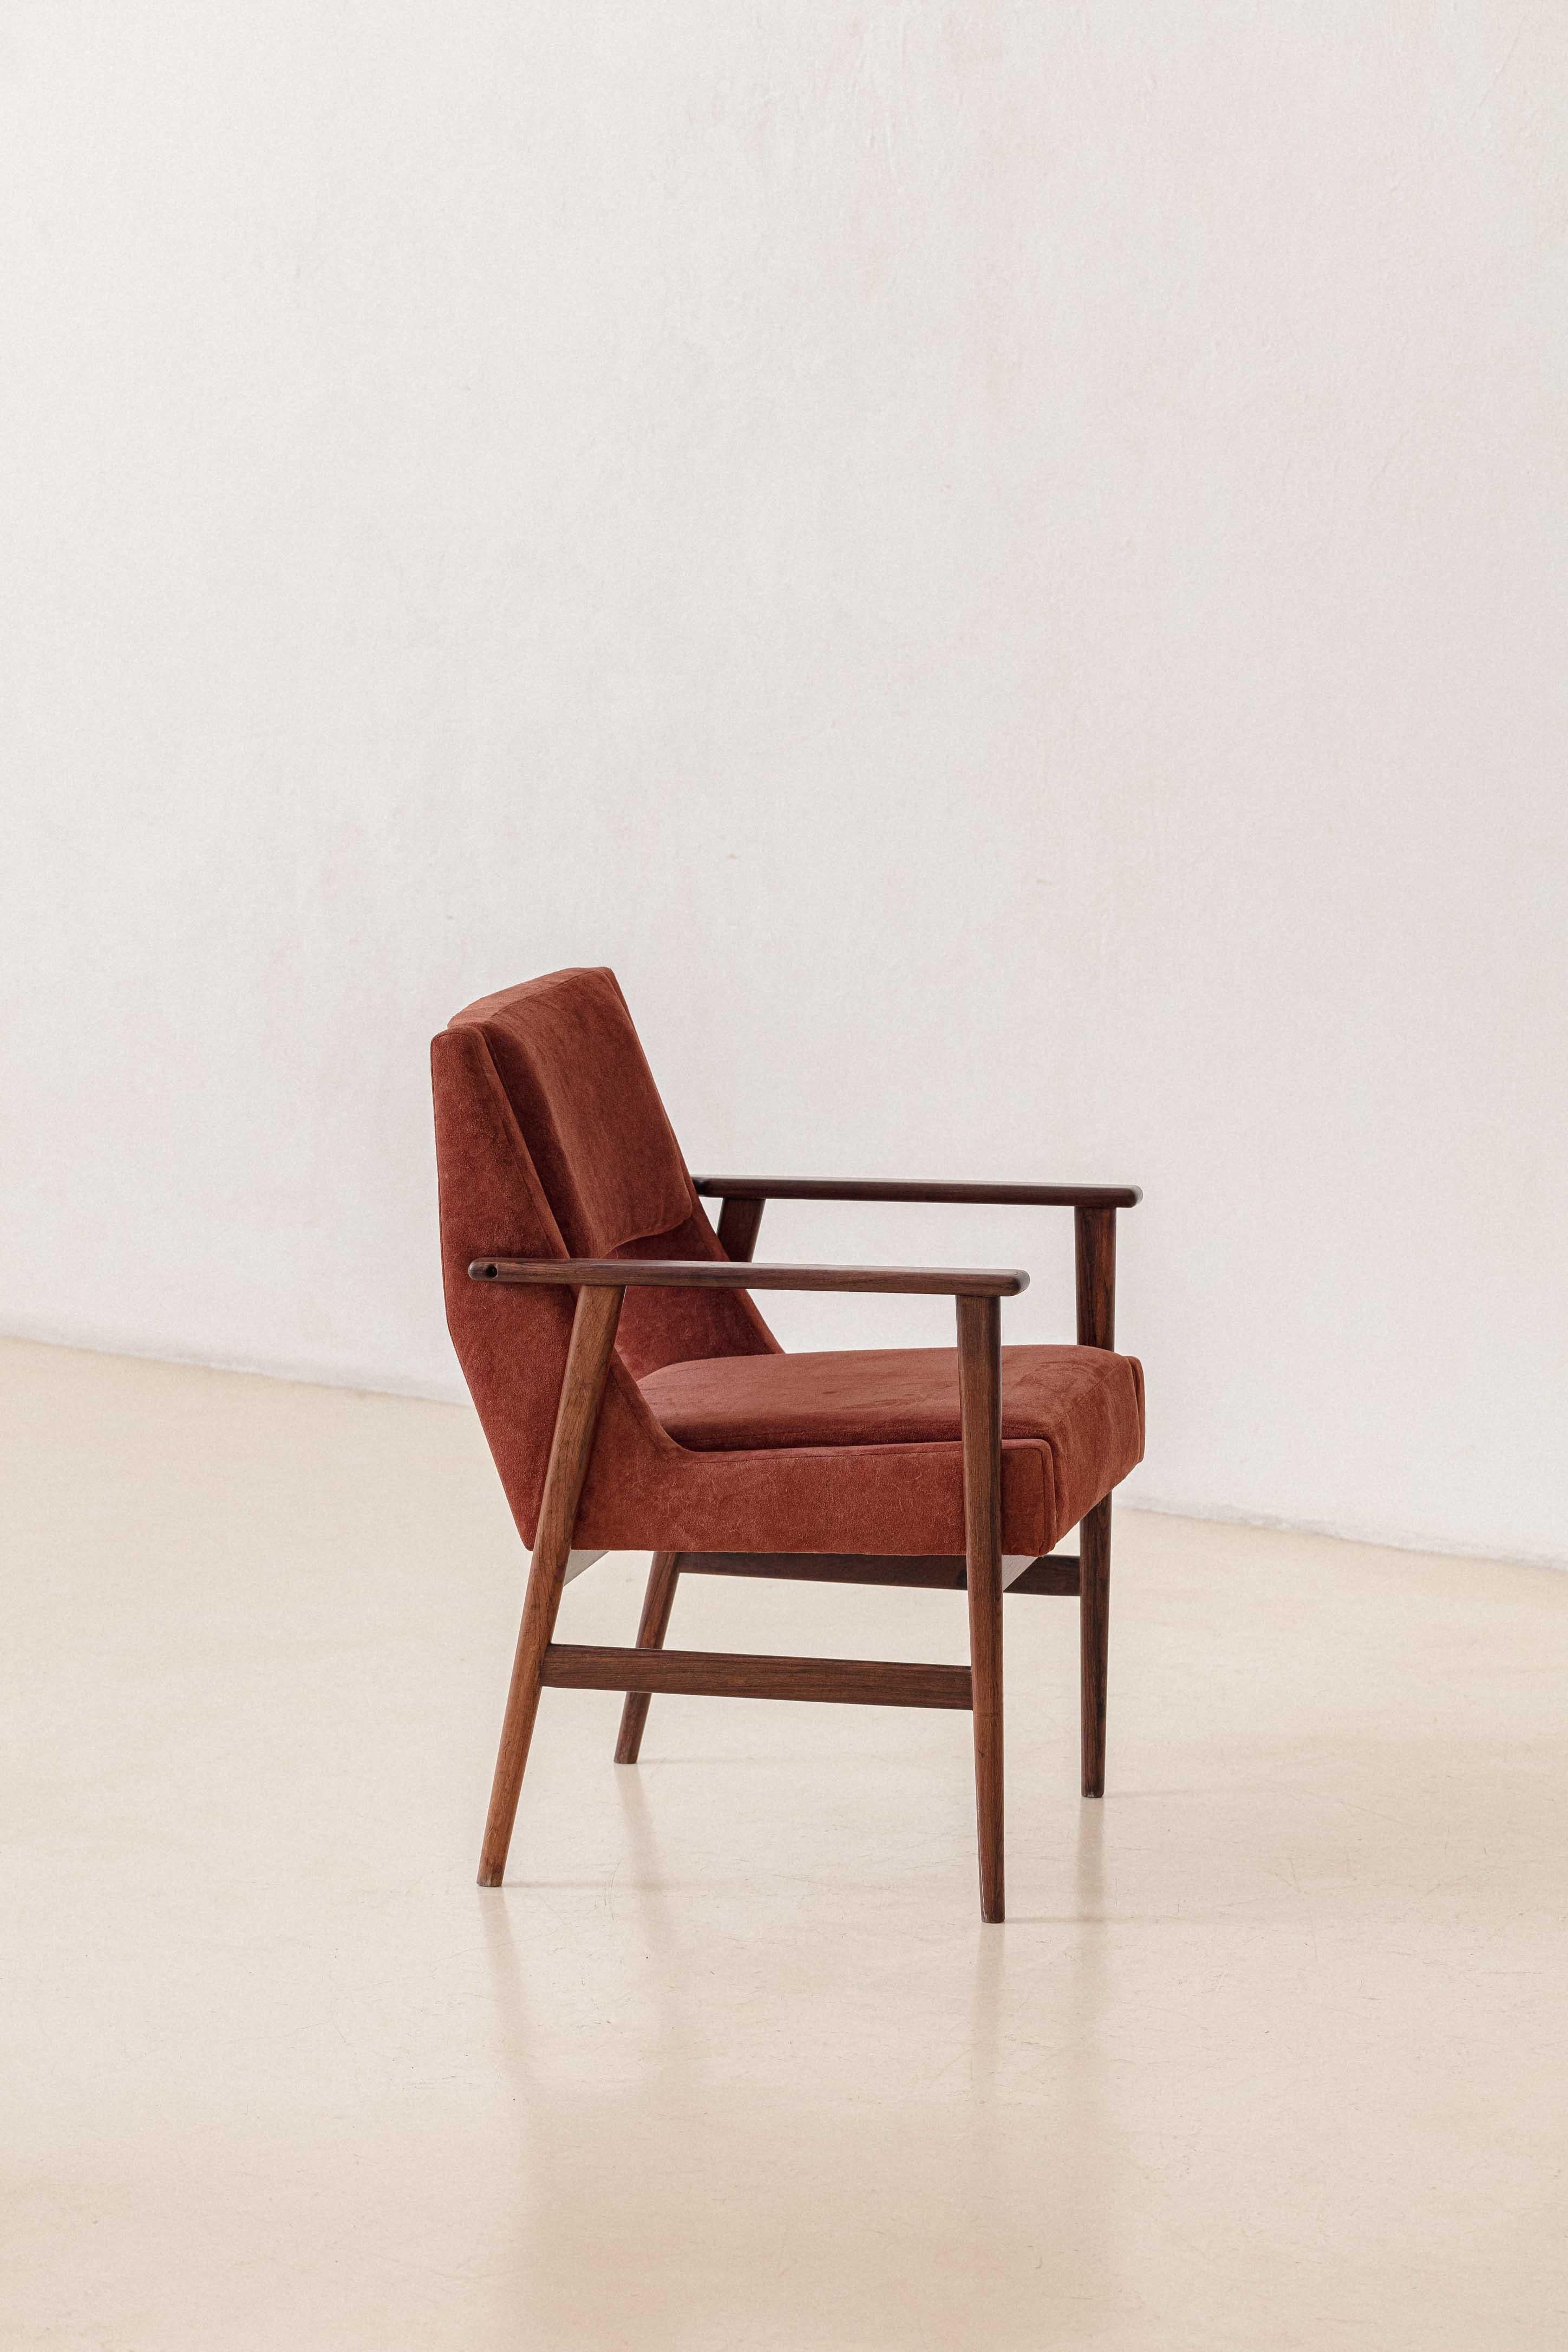 Mid-Century Modern Rosewood Chair with Armrests by Móveis Cantù, 1960s, Brazilian, Midcentury For Sale